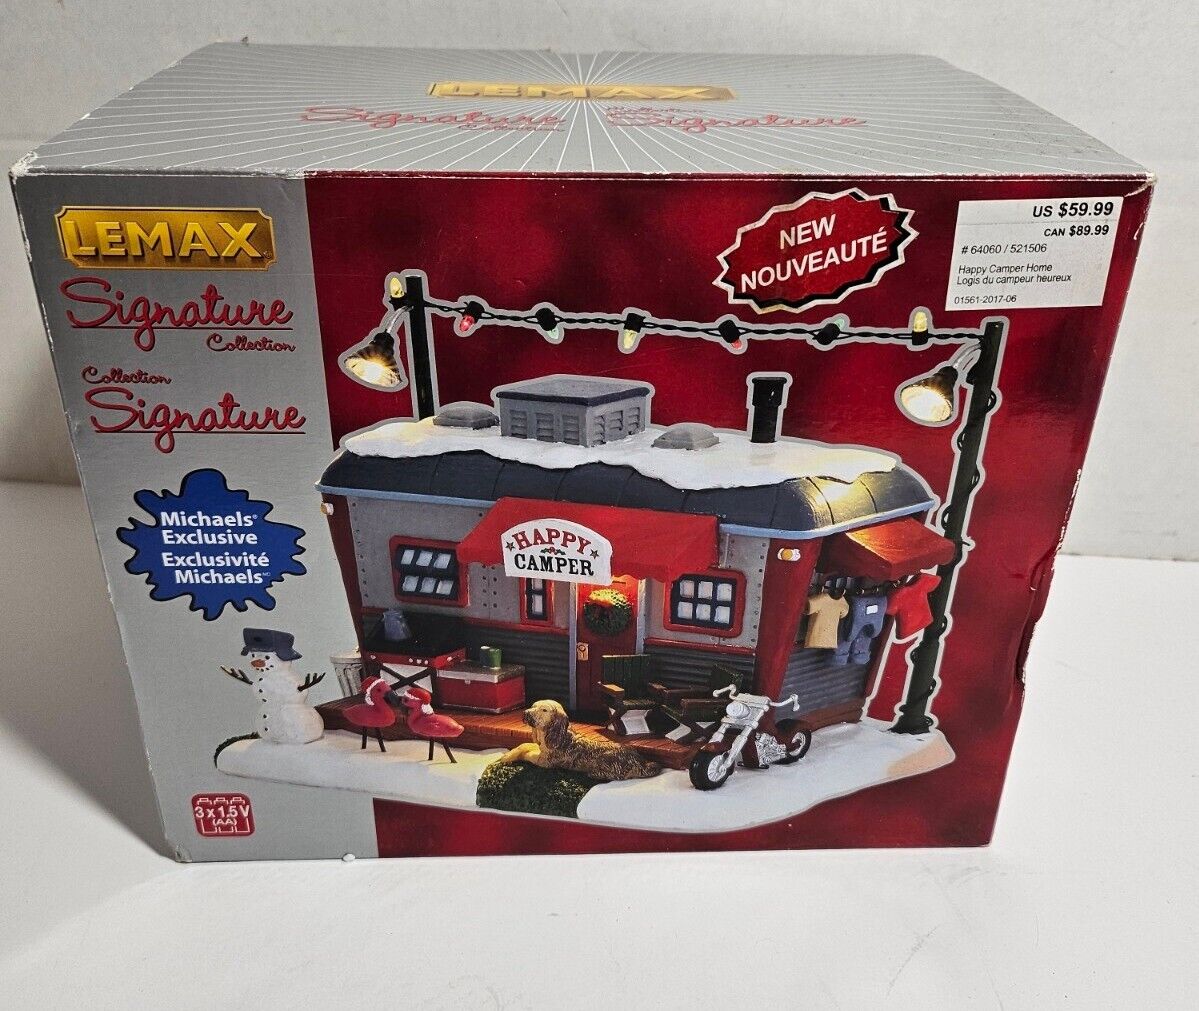 Lemax Happy Camper Home -Trailer RV - Battery Powered Christmas Village #64060MC